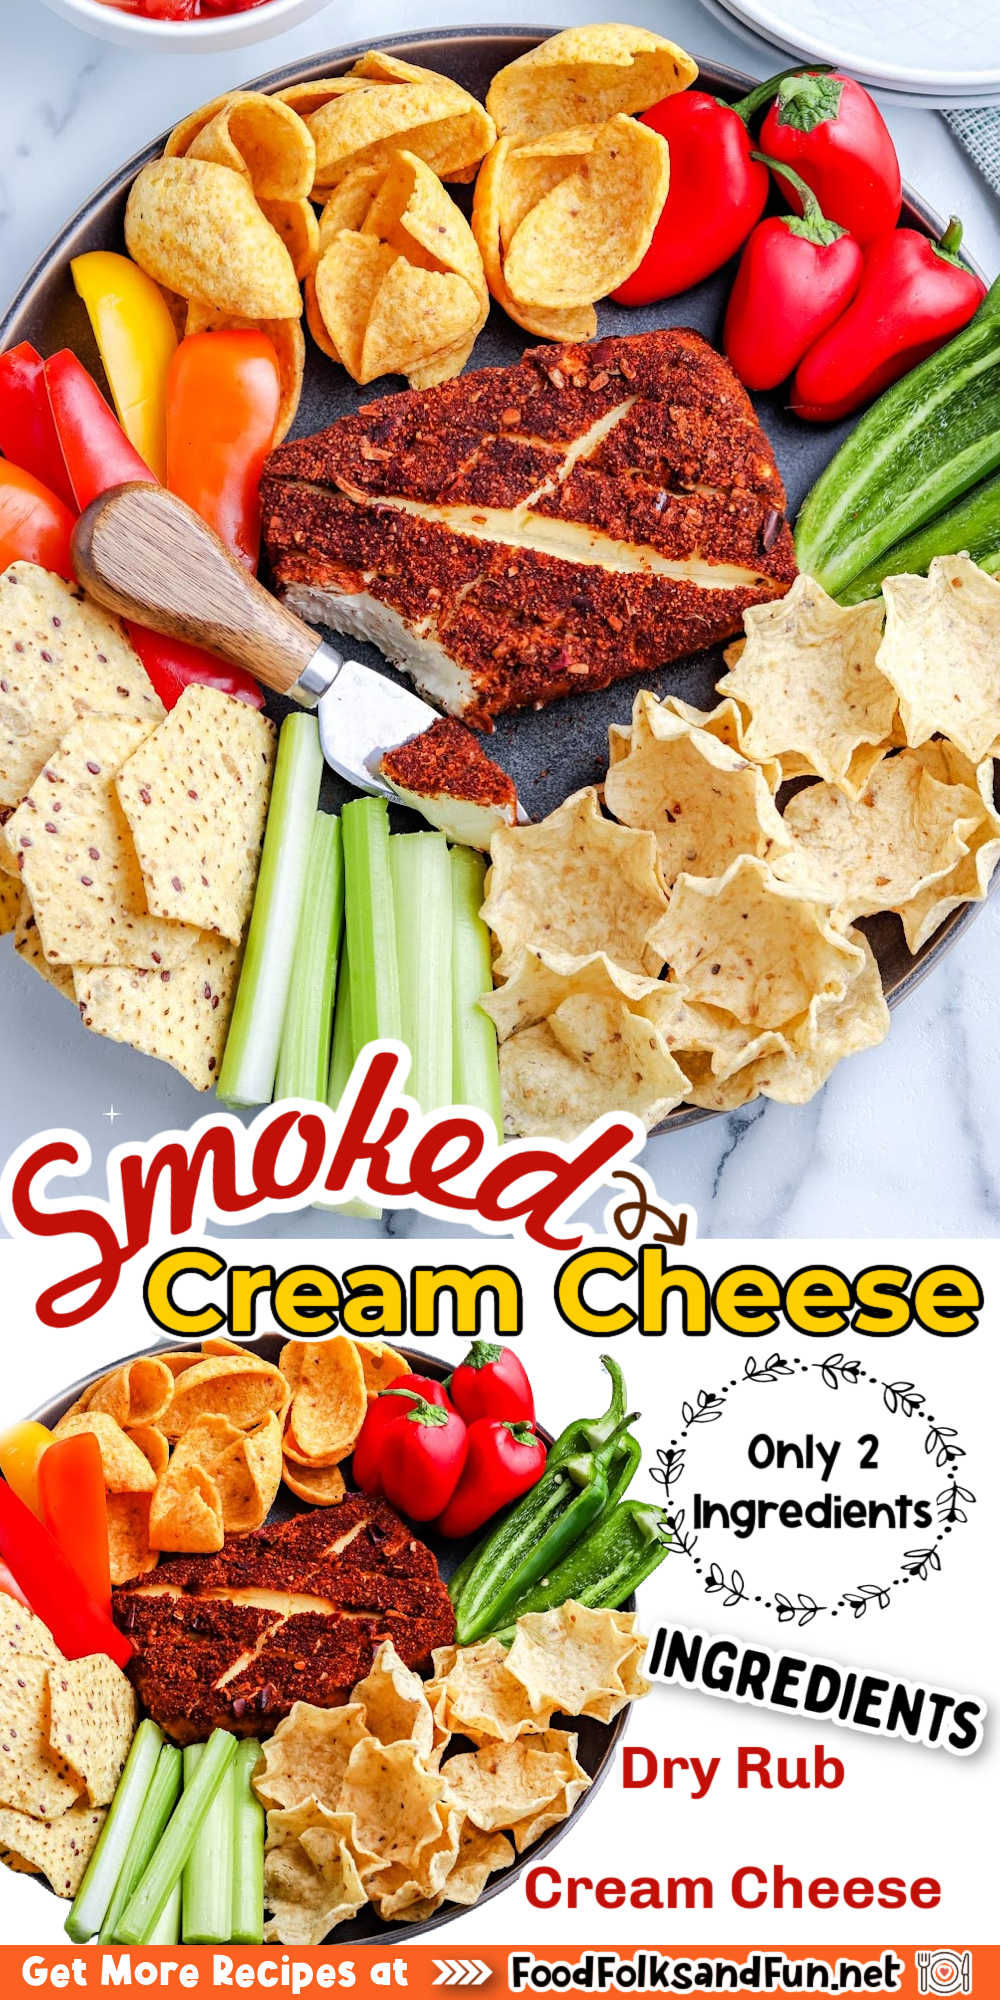 This Smoked Cream Cheese cooks fast on a Traeger grill and may just disappear even quicker at a party. “Highly addicting” doesn’t begin to describe the flavorful, savory taste of a good smoked cream cheese. via @foodfolksandfun